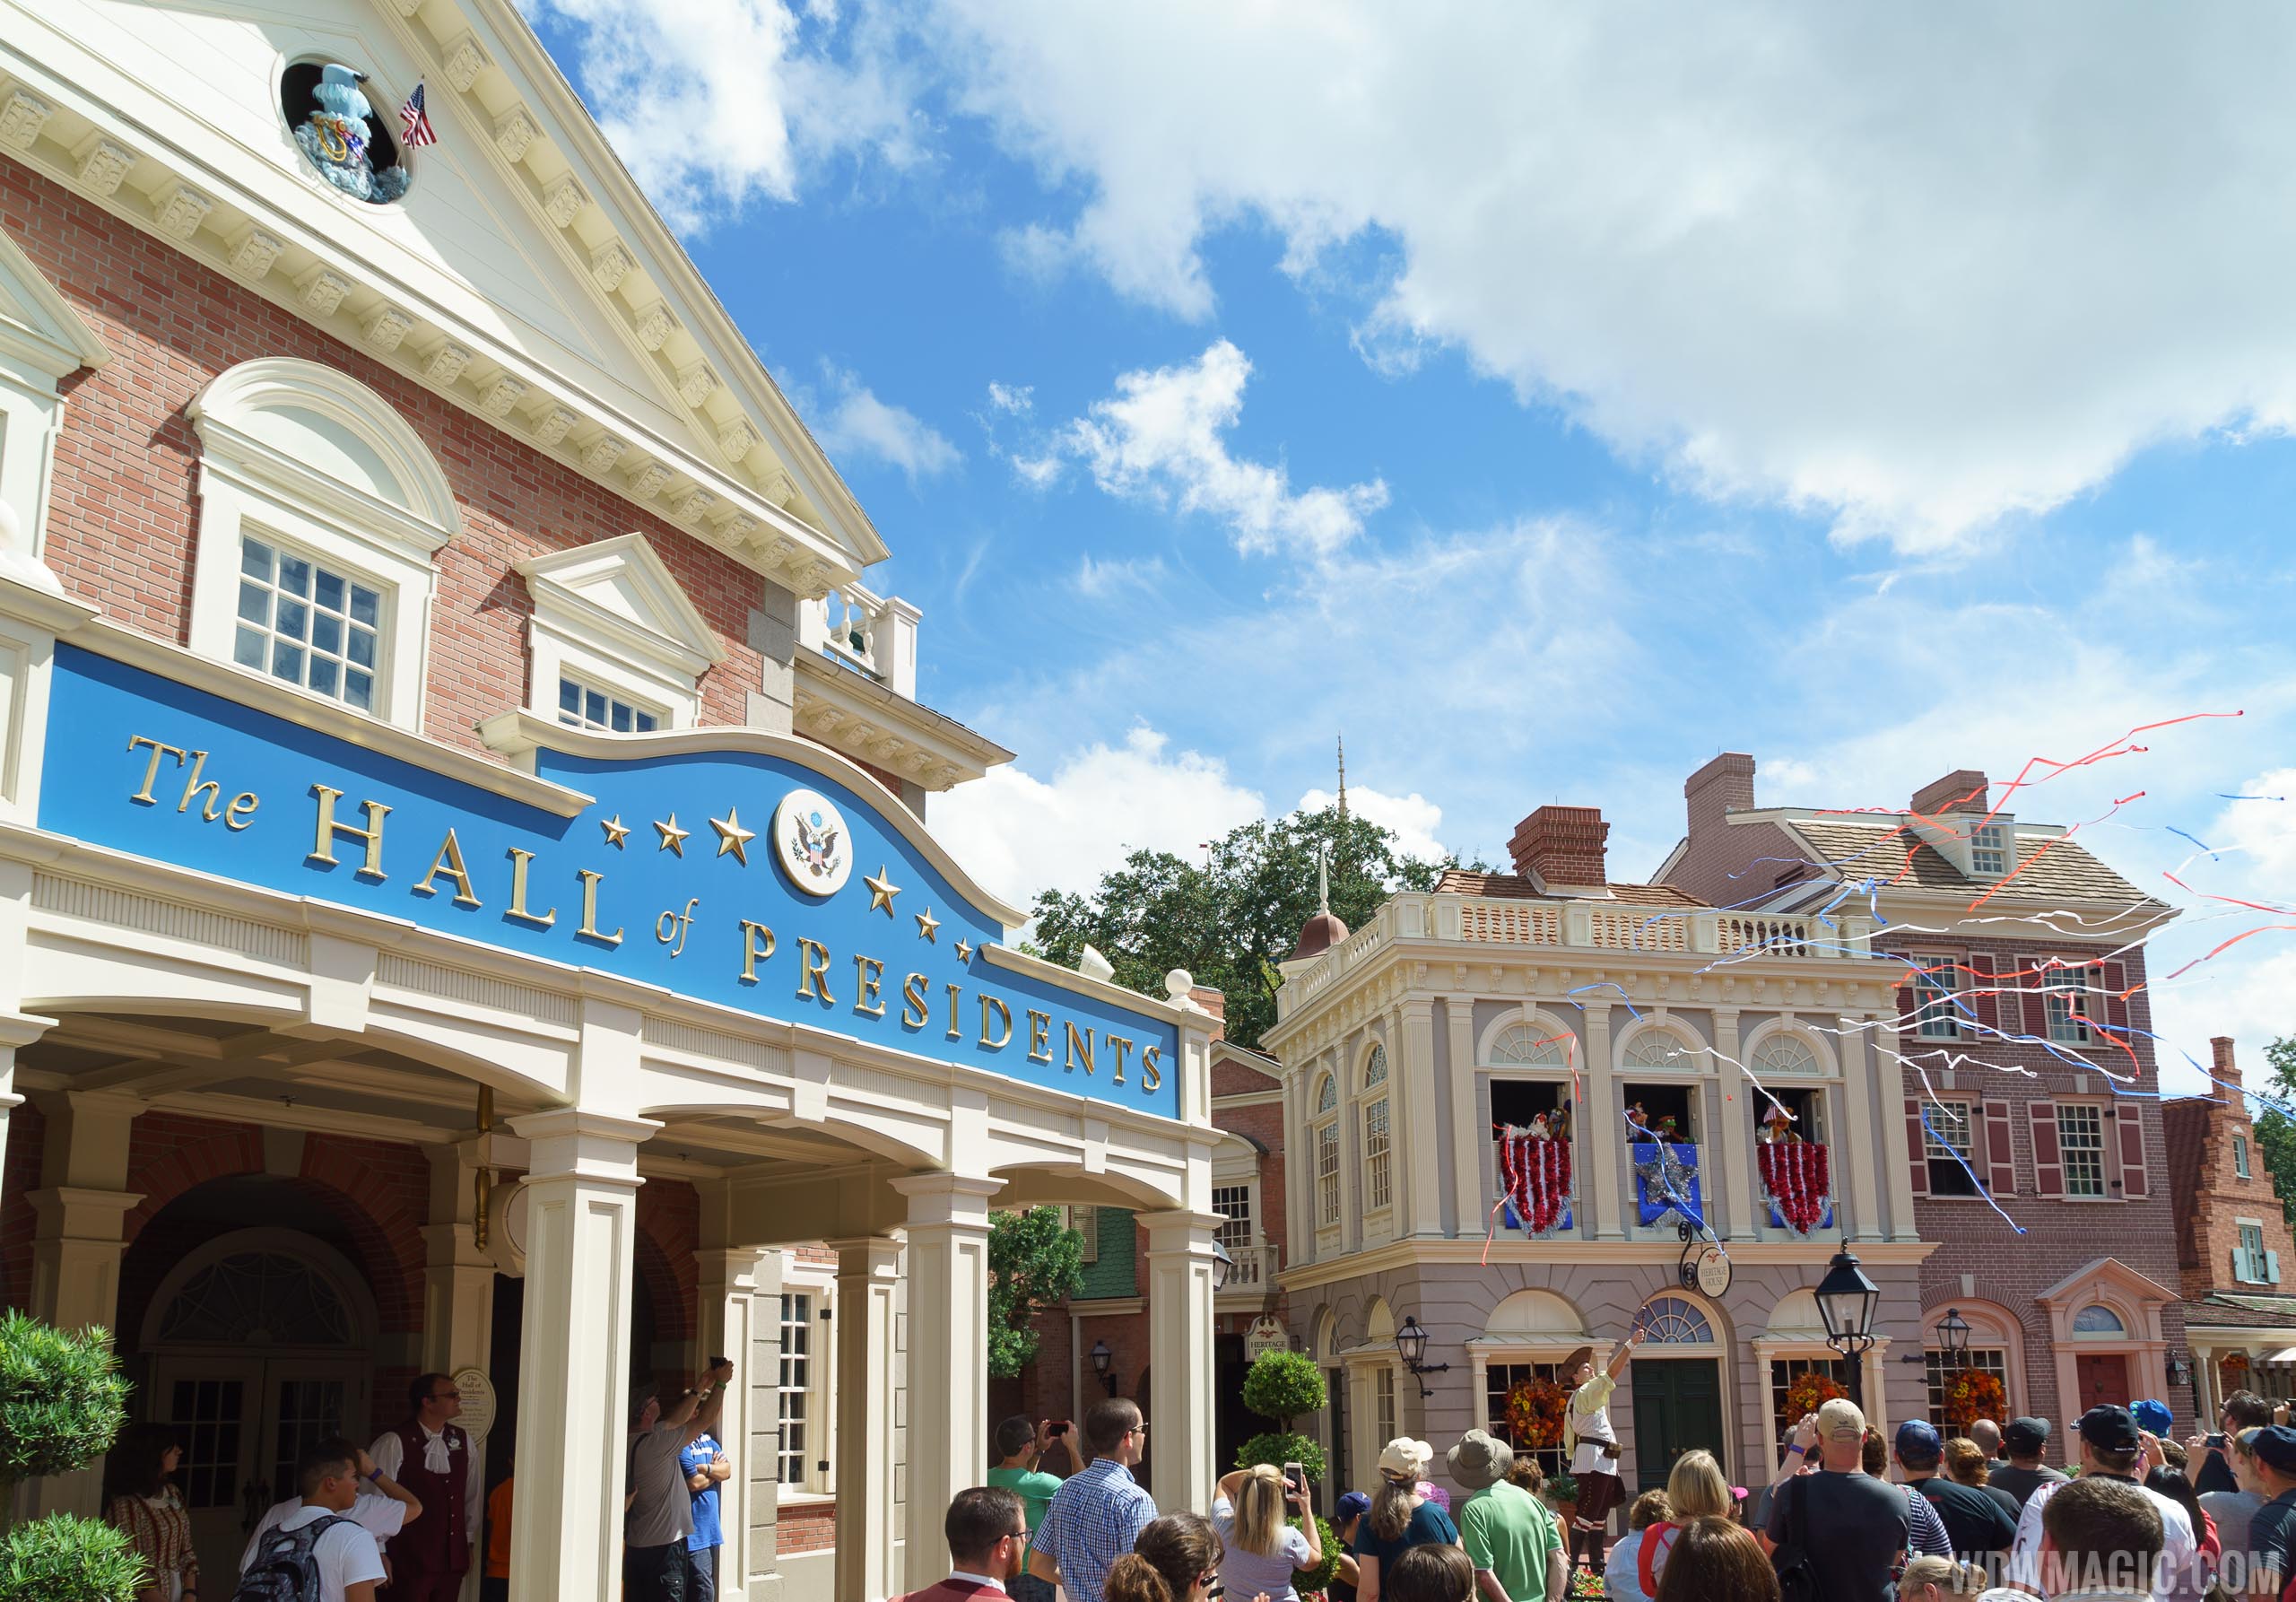 Hall of Presidents now closed for refurbishment ahead of today’s presidential inauguration